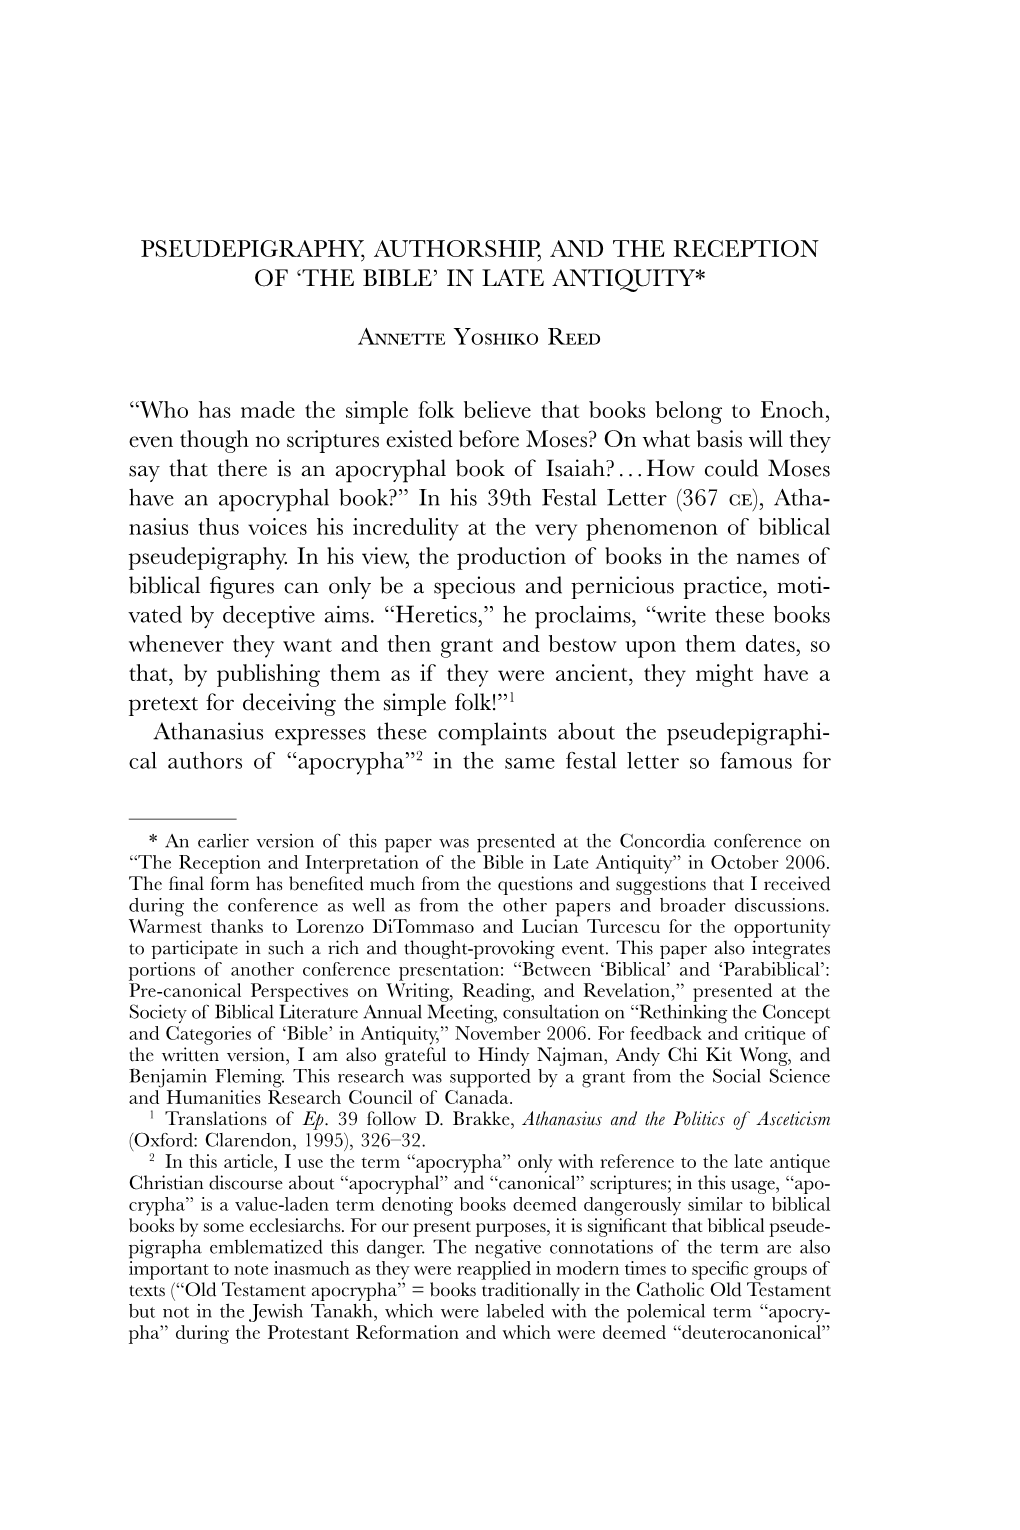 The Bible’ in Late Antiquity*